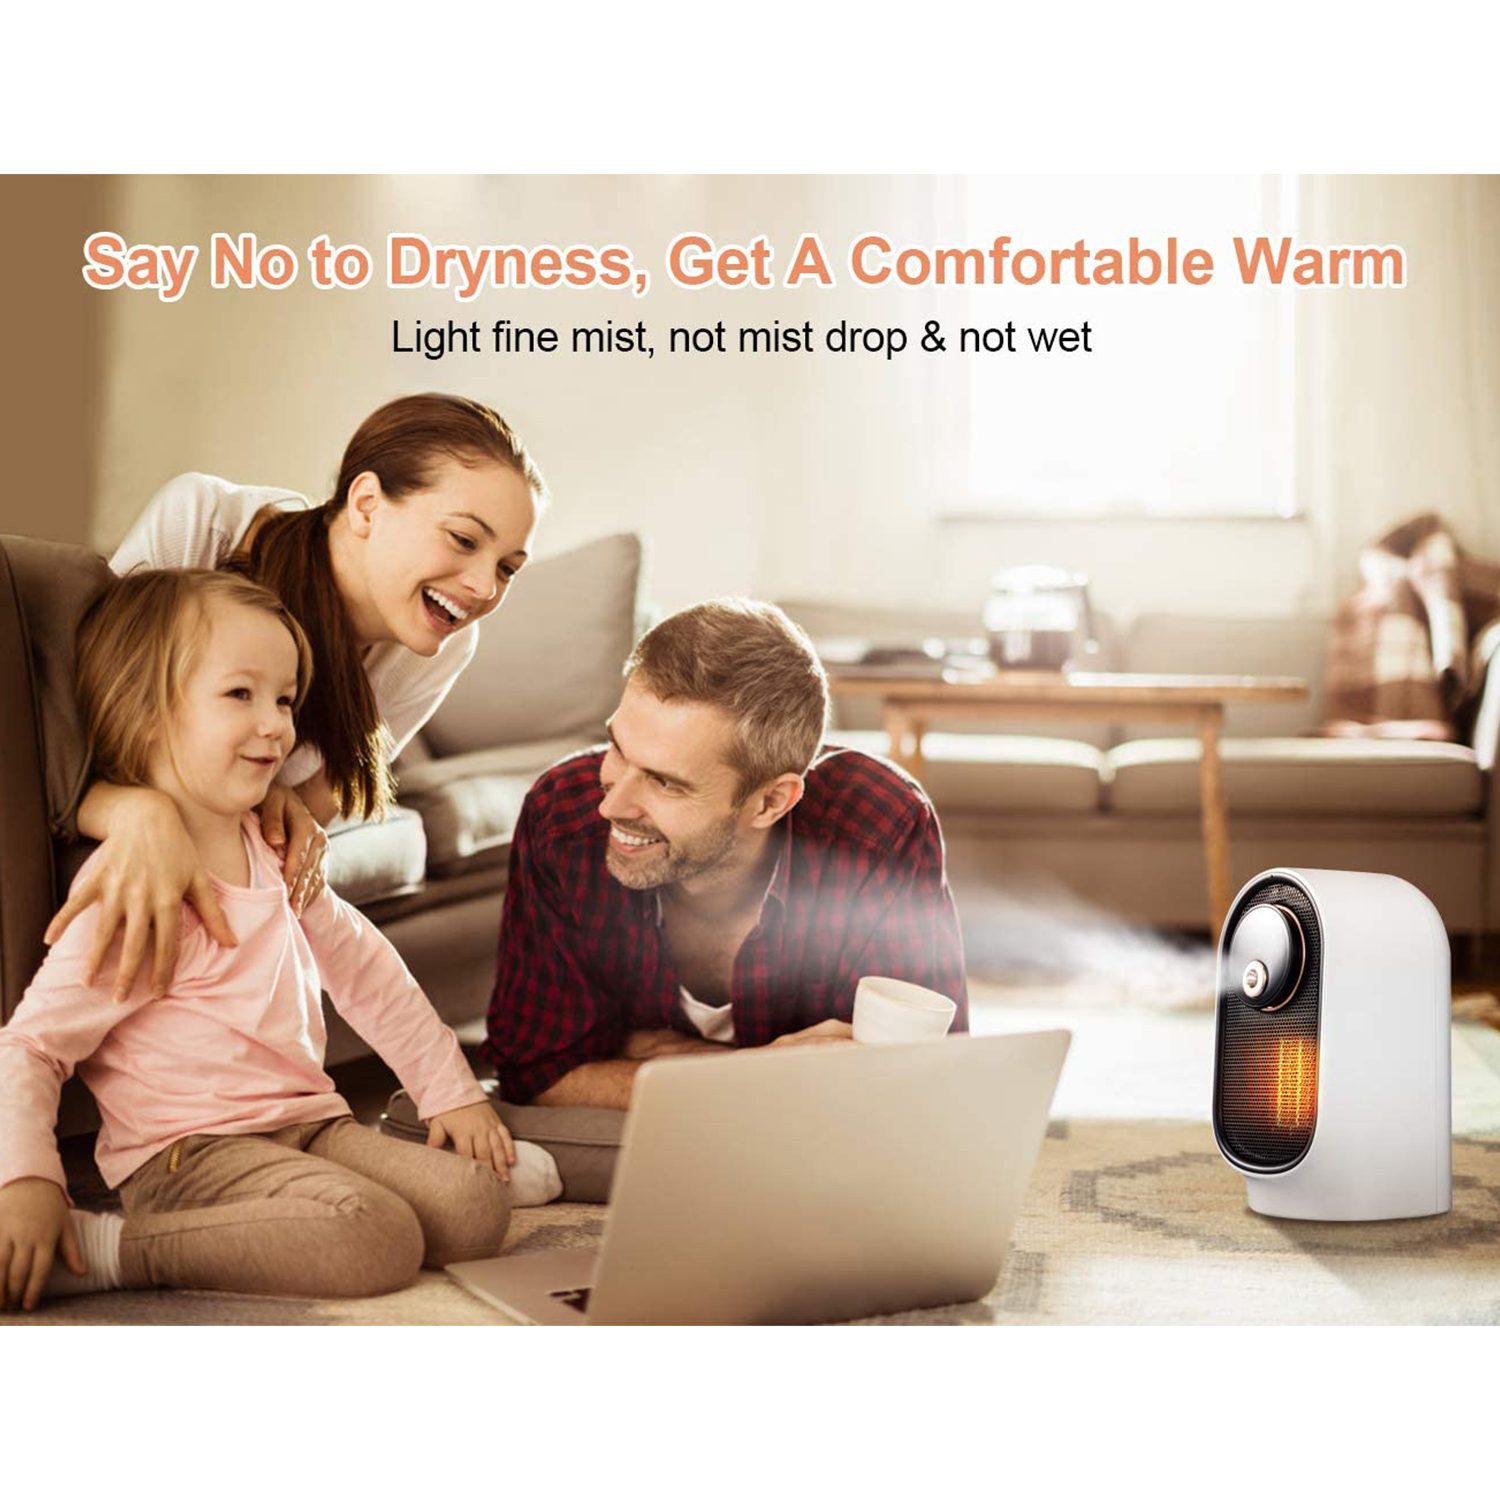 Geek Heat Slim Oscillating Desktop Space Heater with Humidifier, White - image 4 of 7